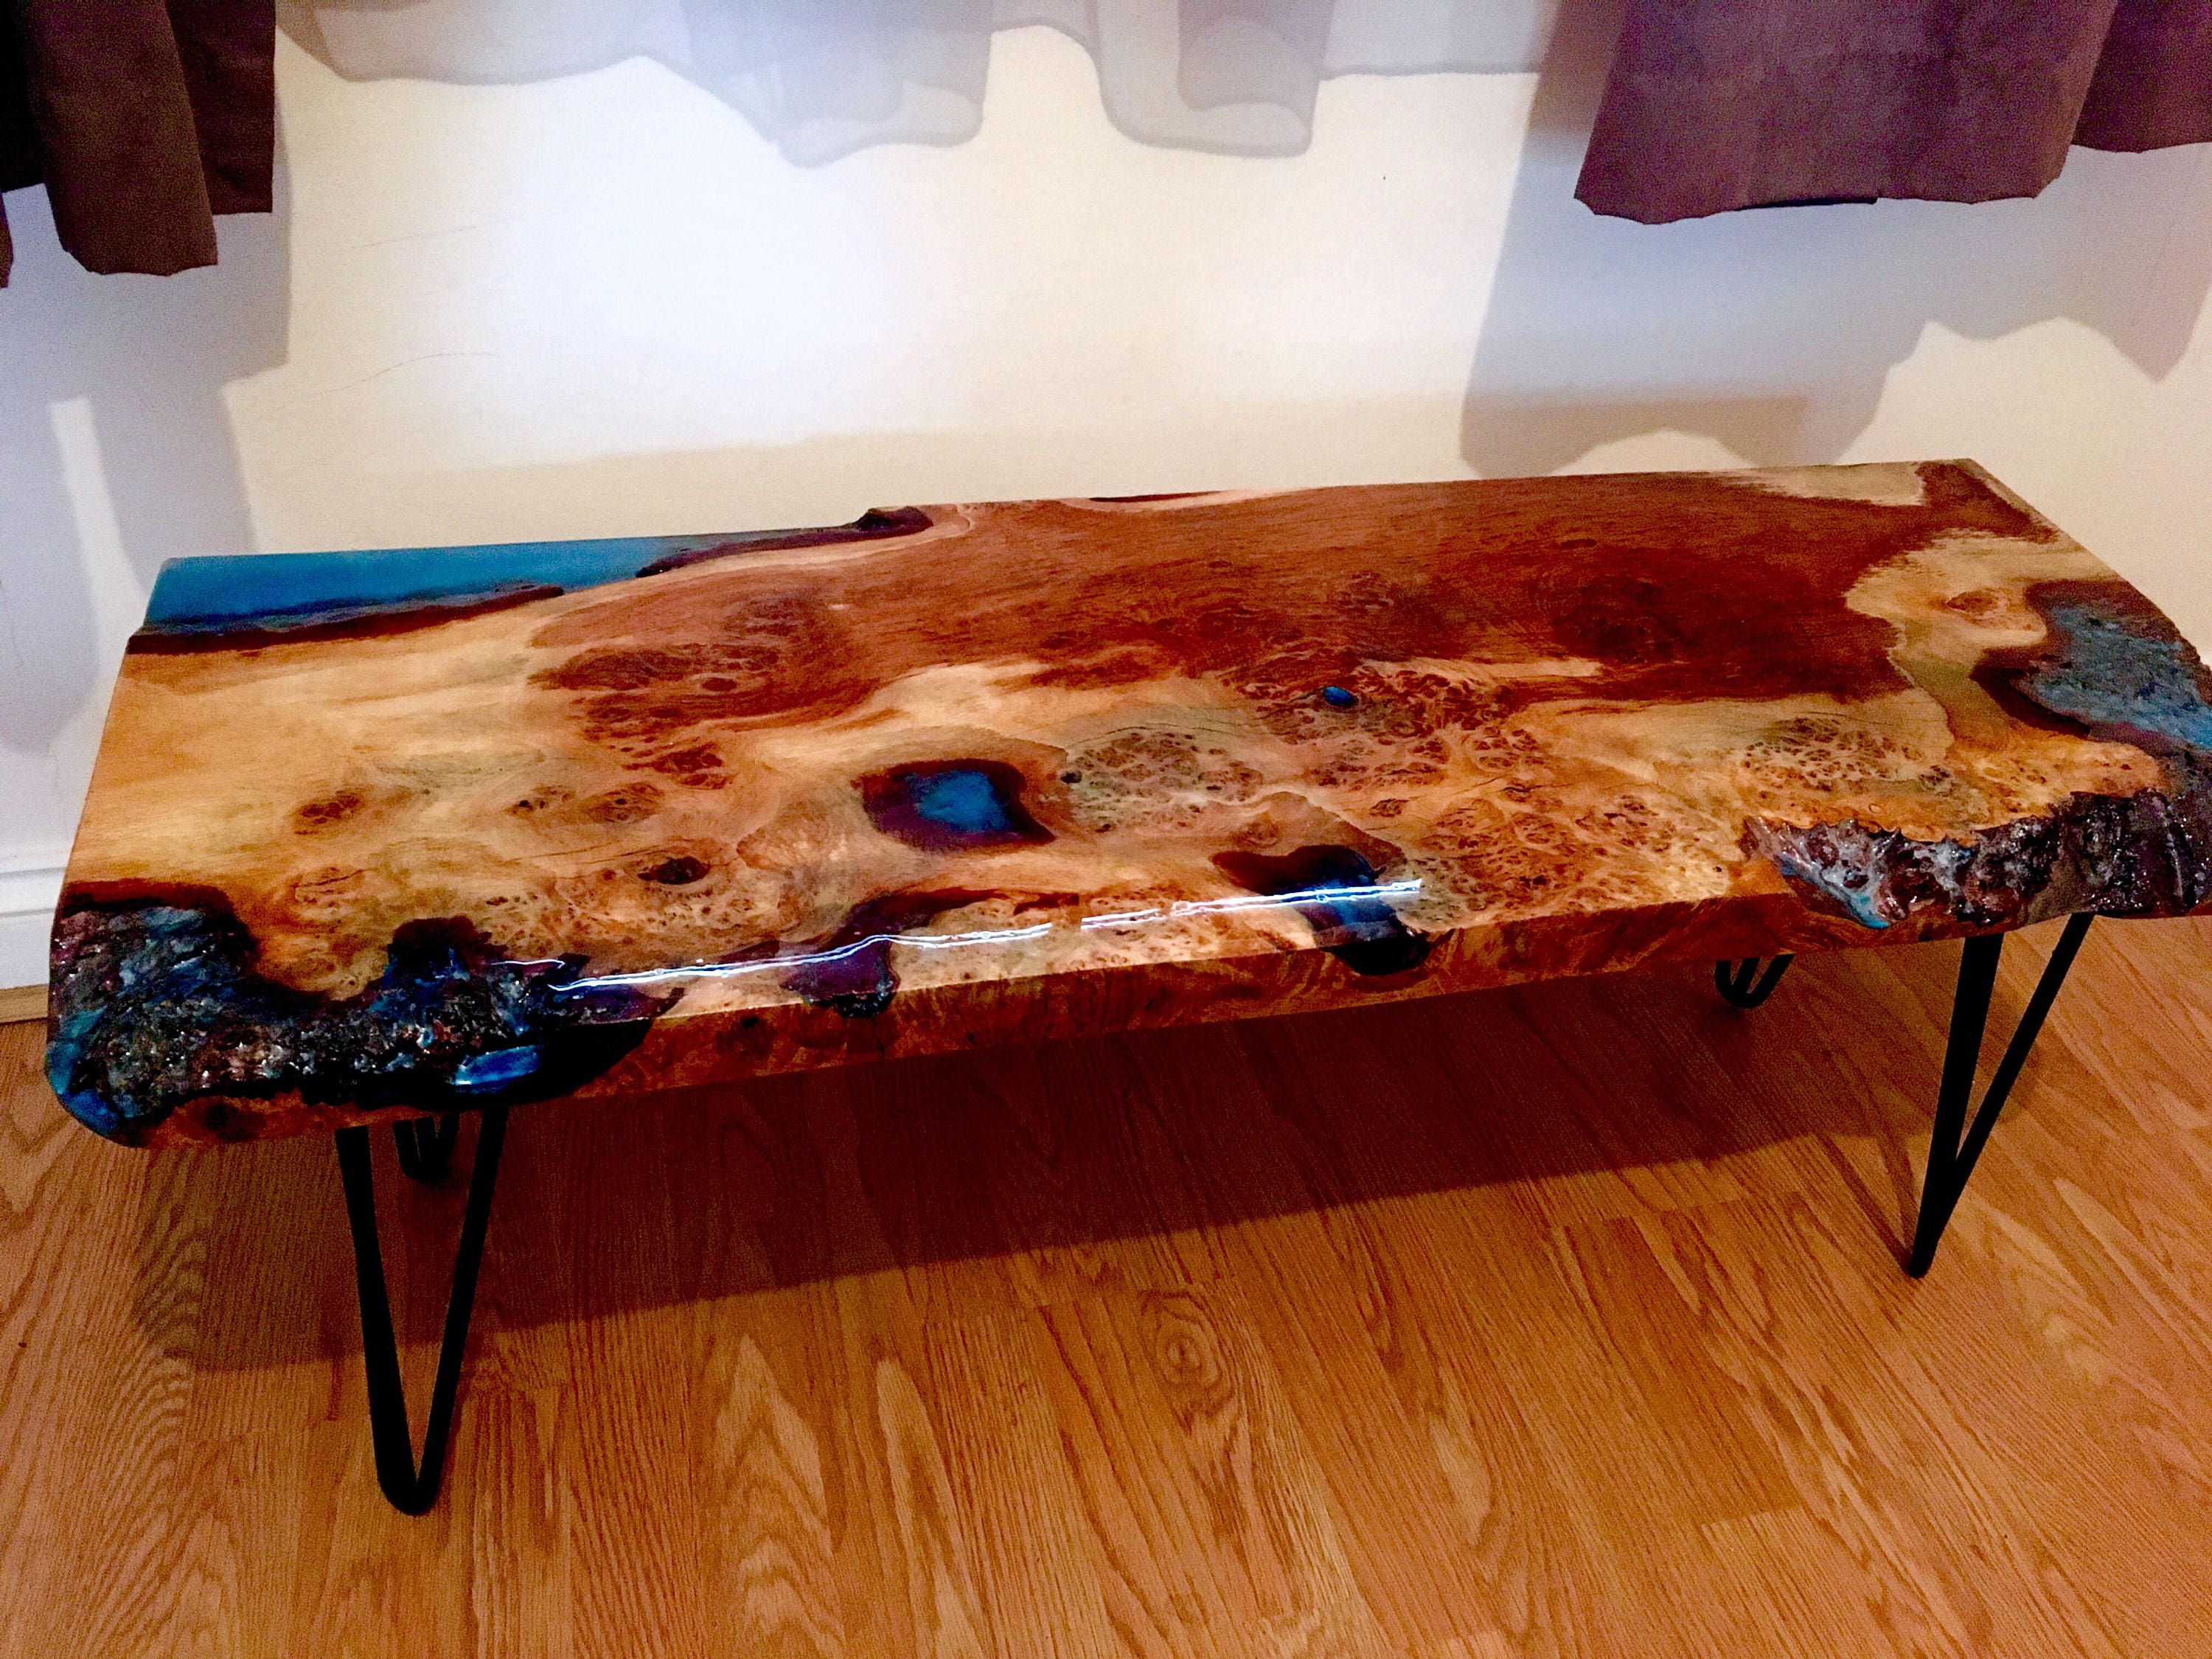 SOLD Burr Oak Live edge Character Epoxy resin coffee table | Etsy